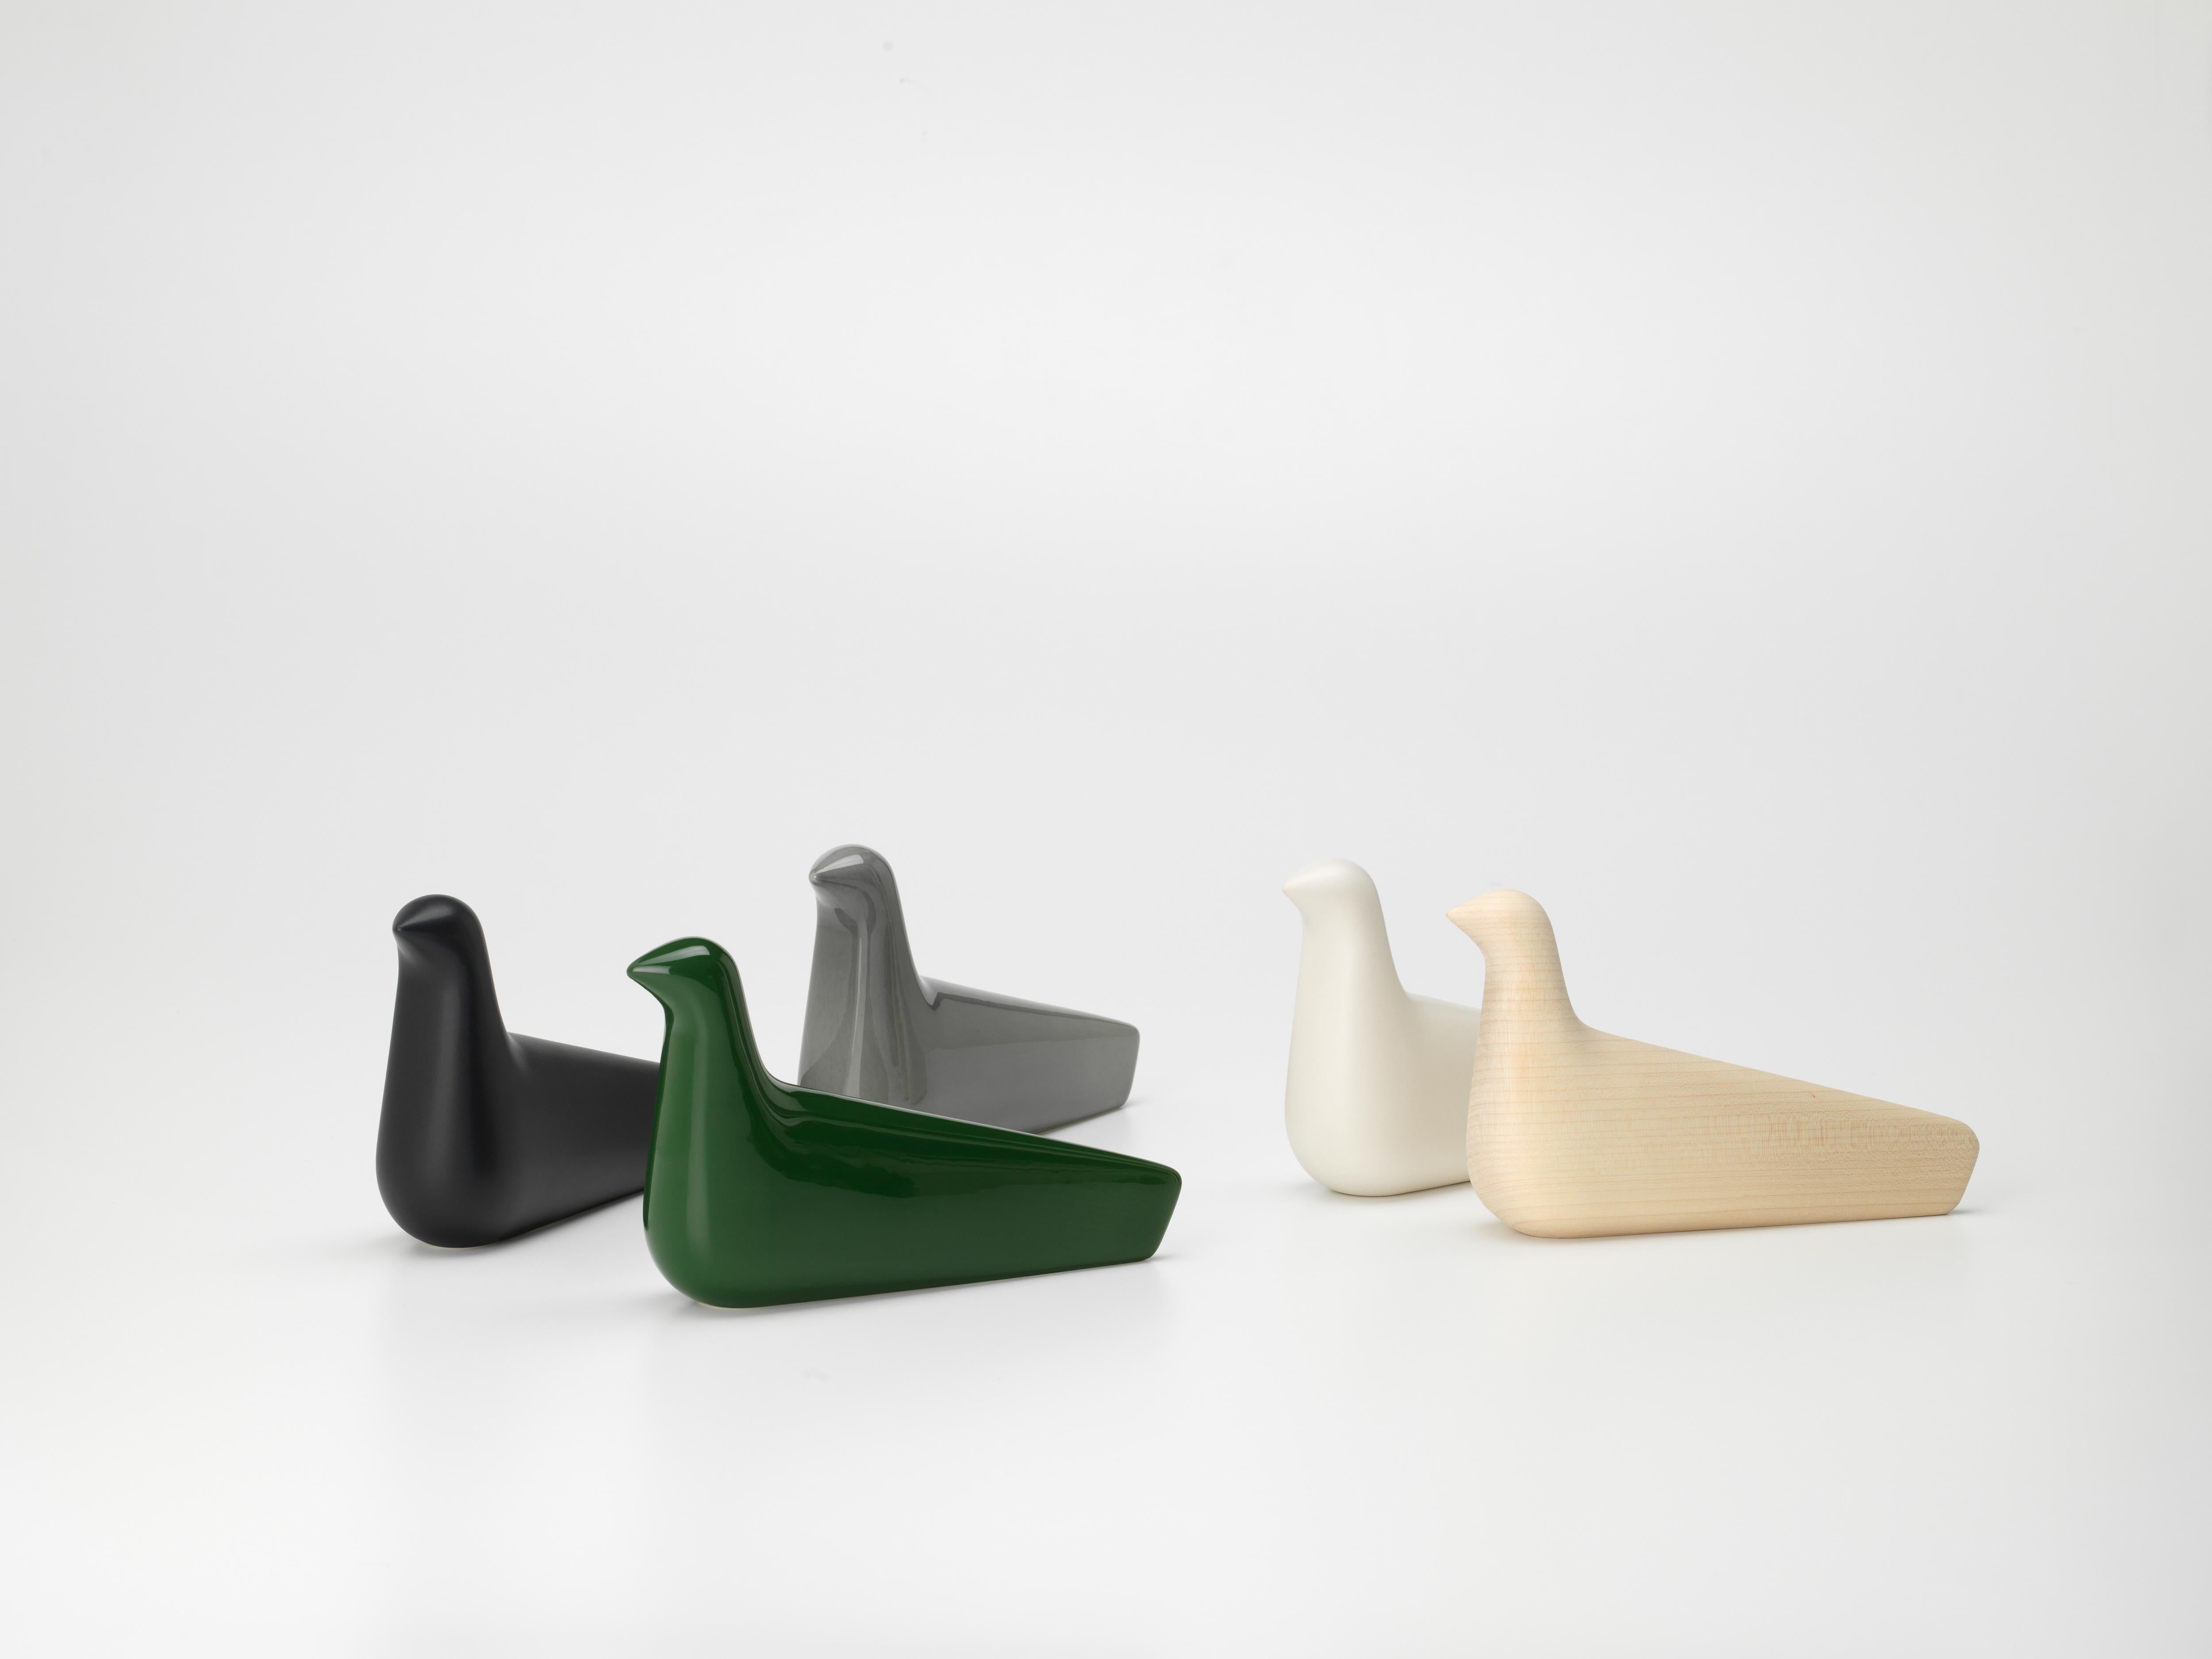 Vitra L'Oiseau Ceramic in Ivy Gloss by Ronan & Erwan Bouroullec In New Condition For Sale In New York, NY